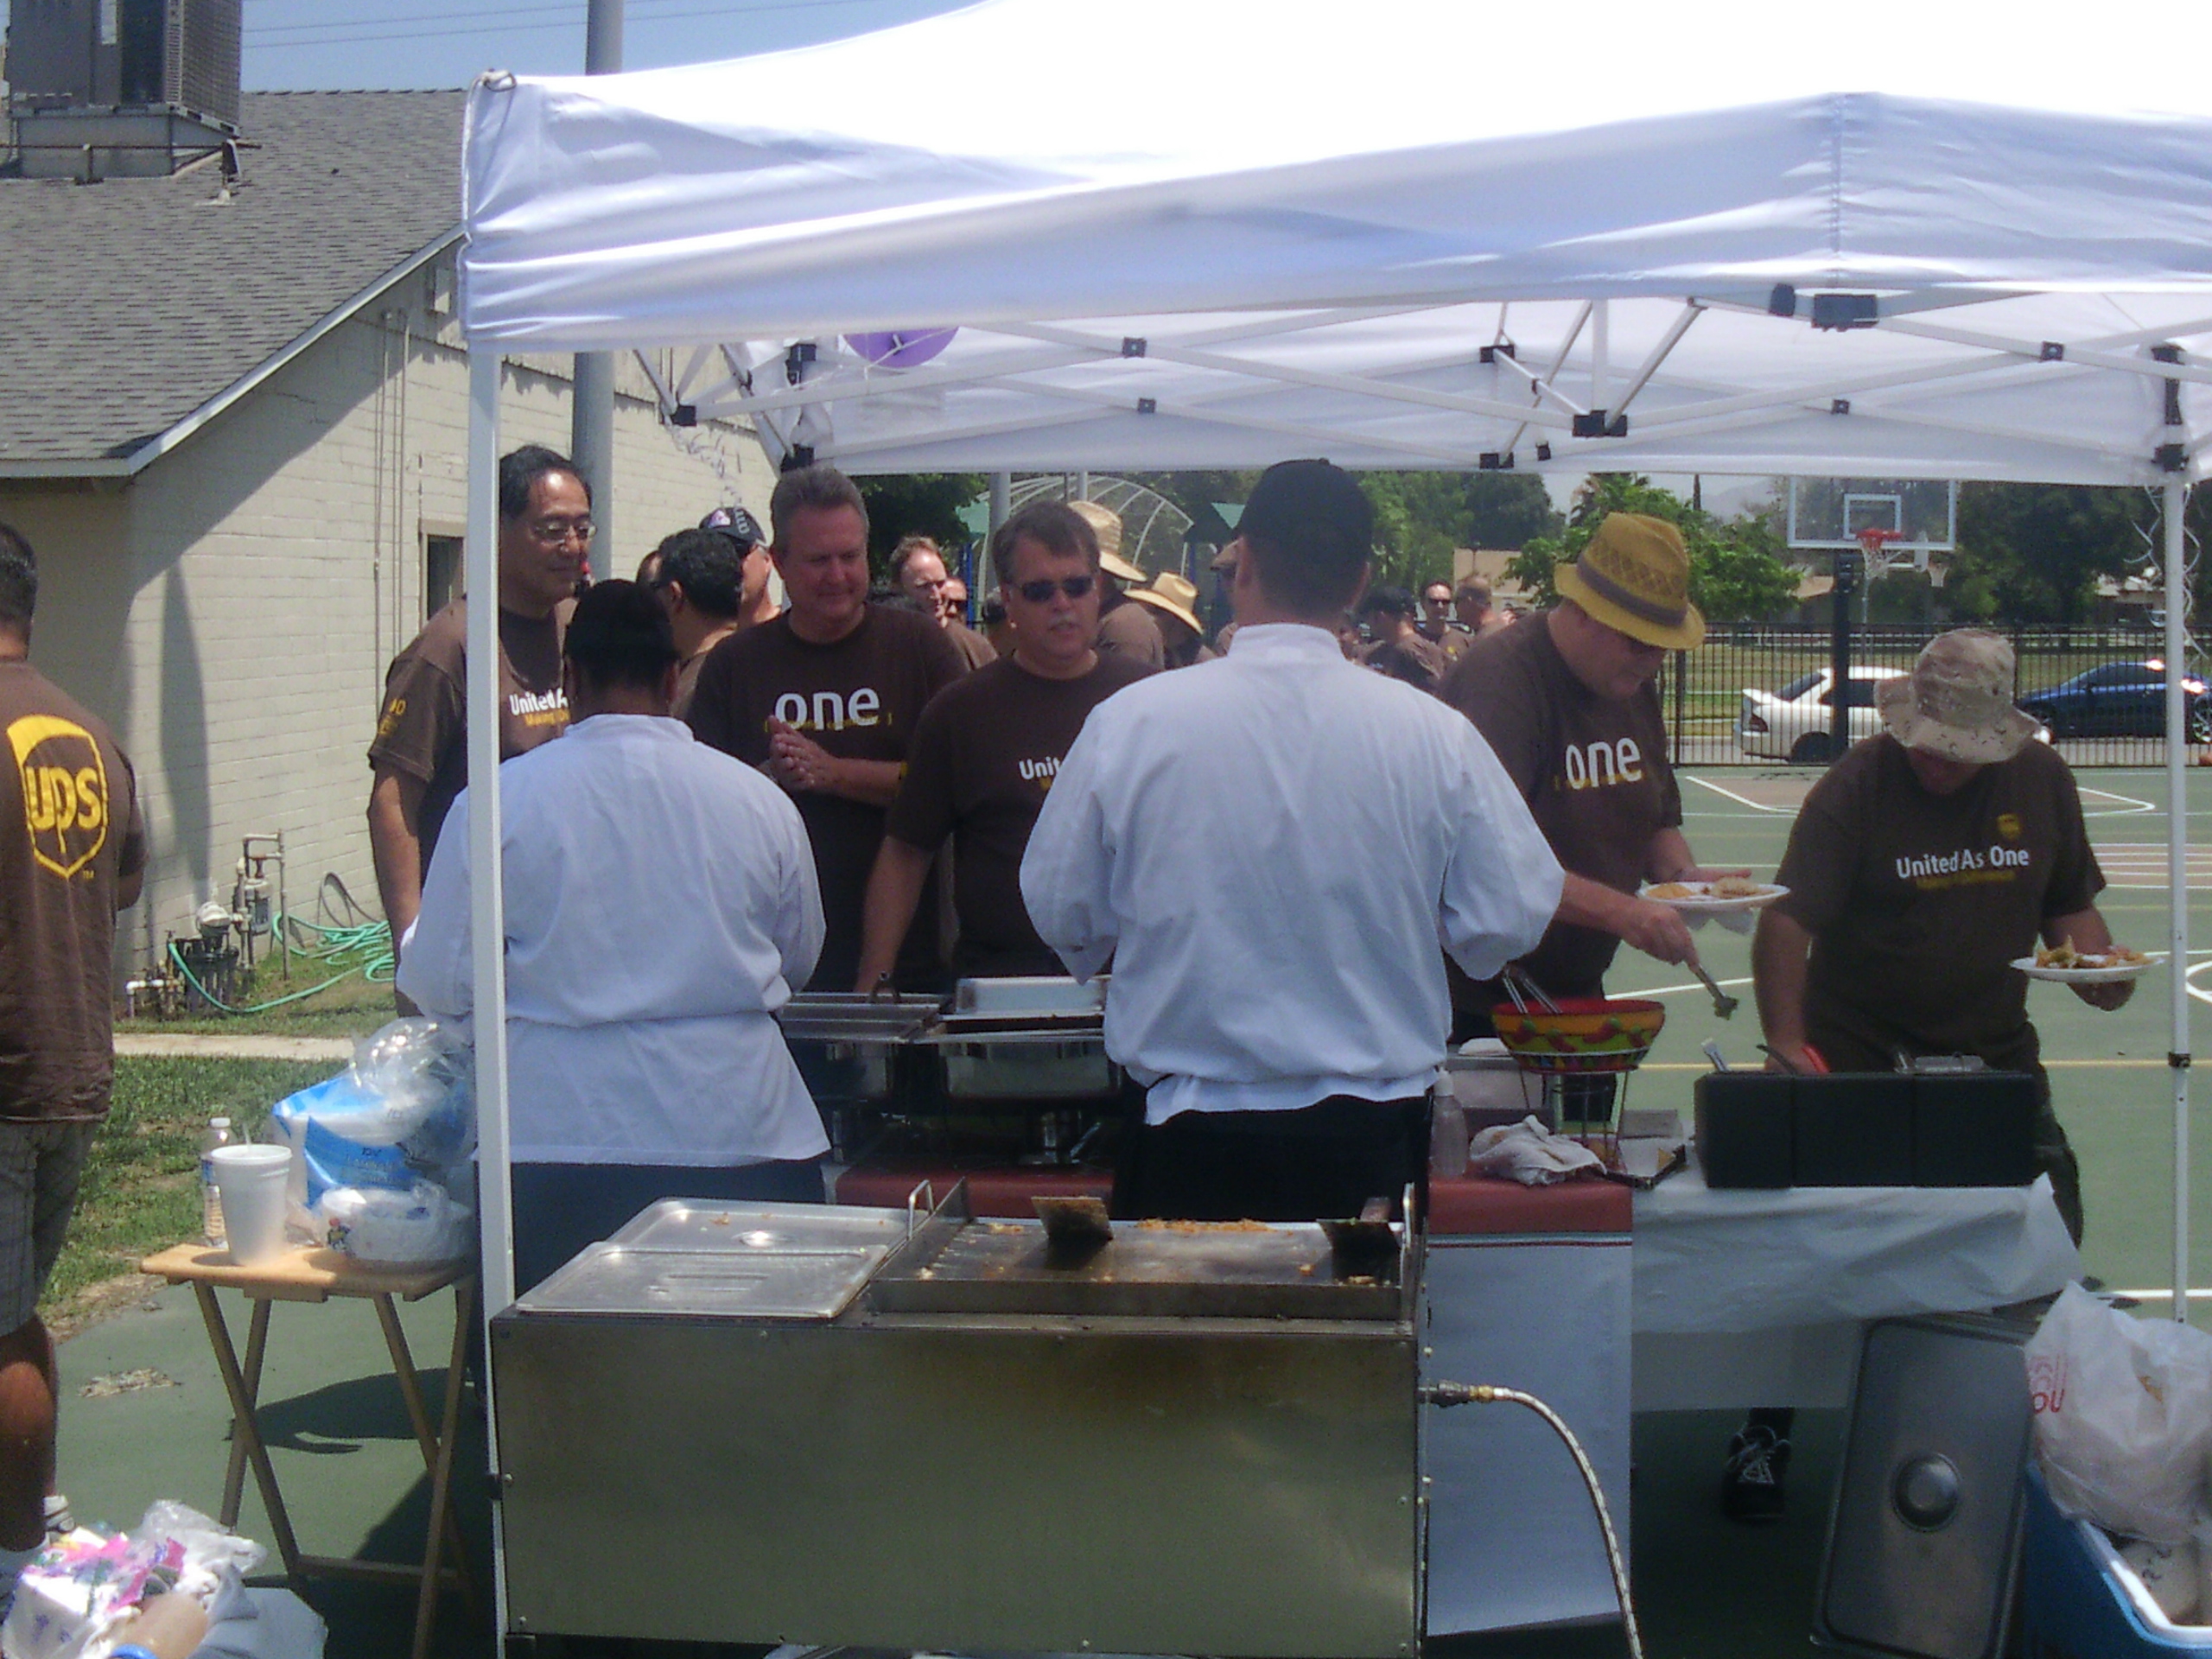 Taco Catering Inland Empire ups event